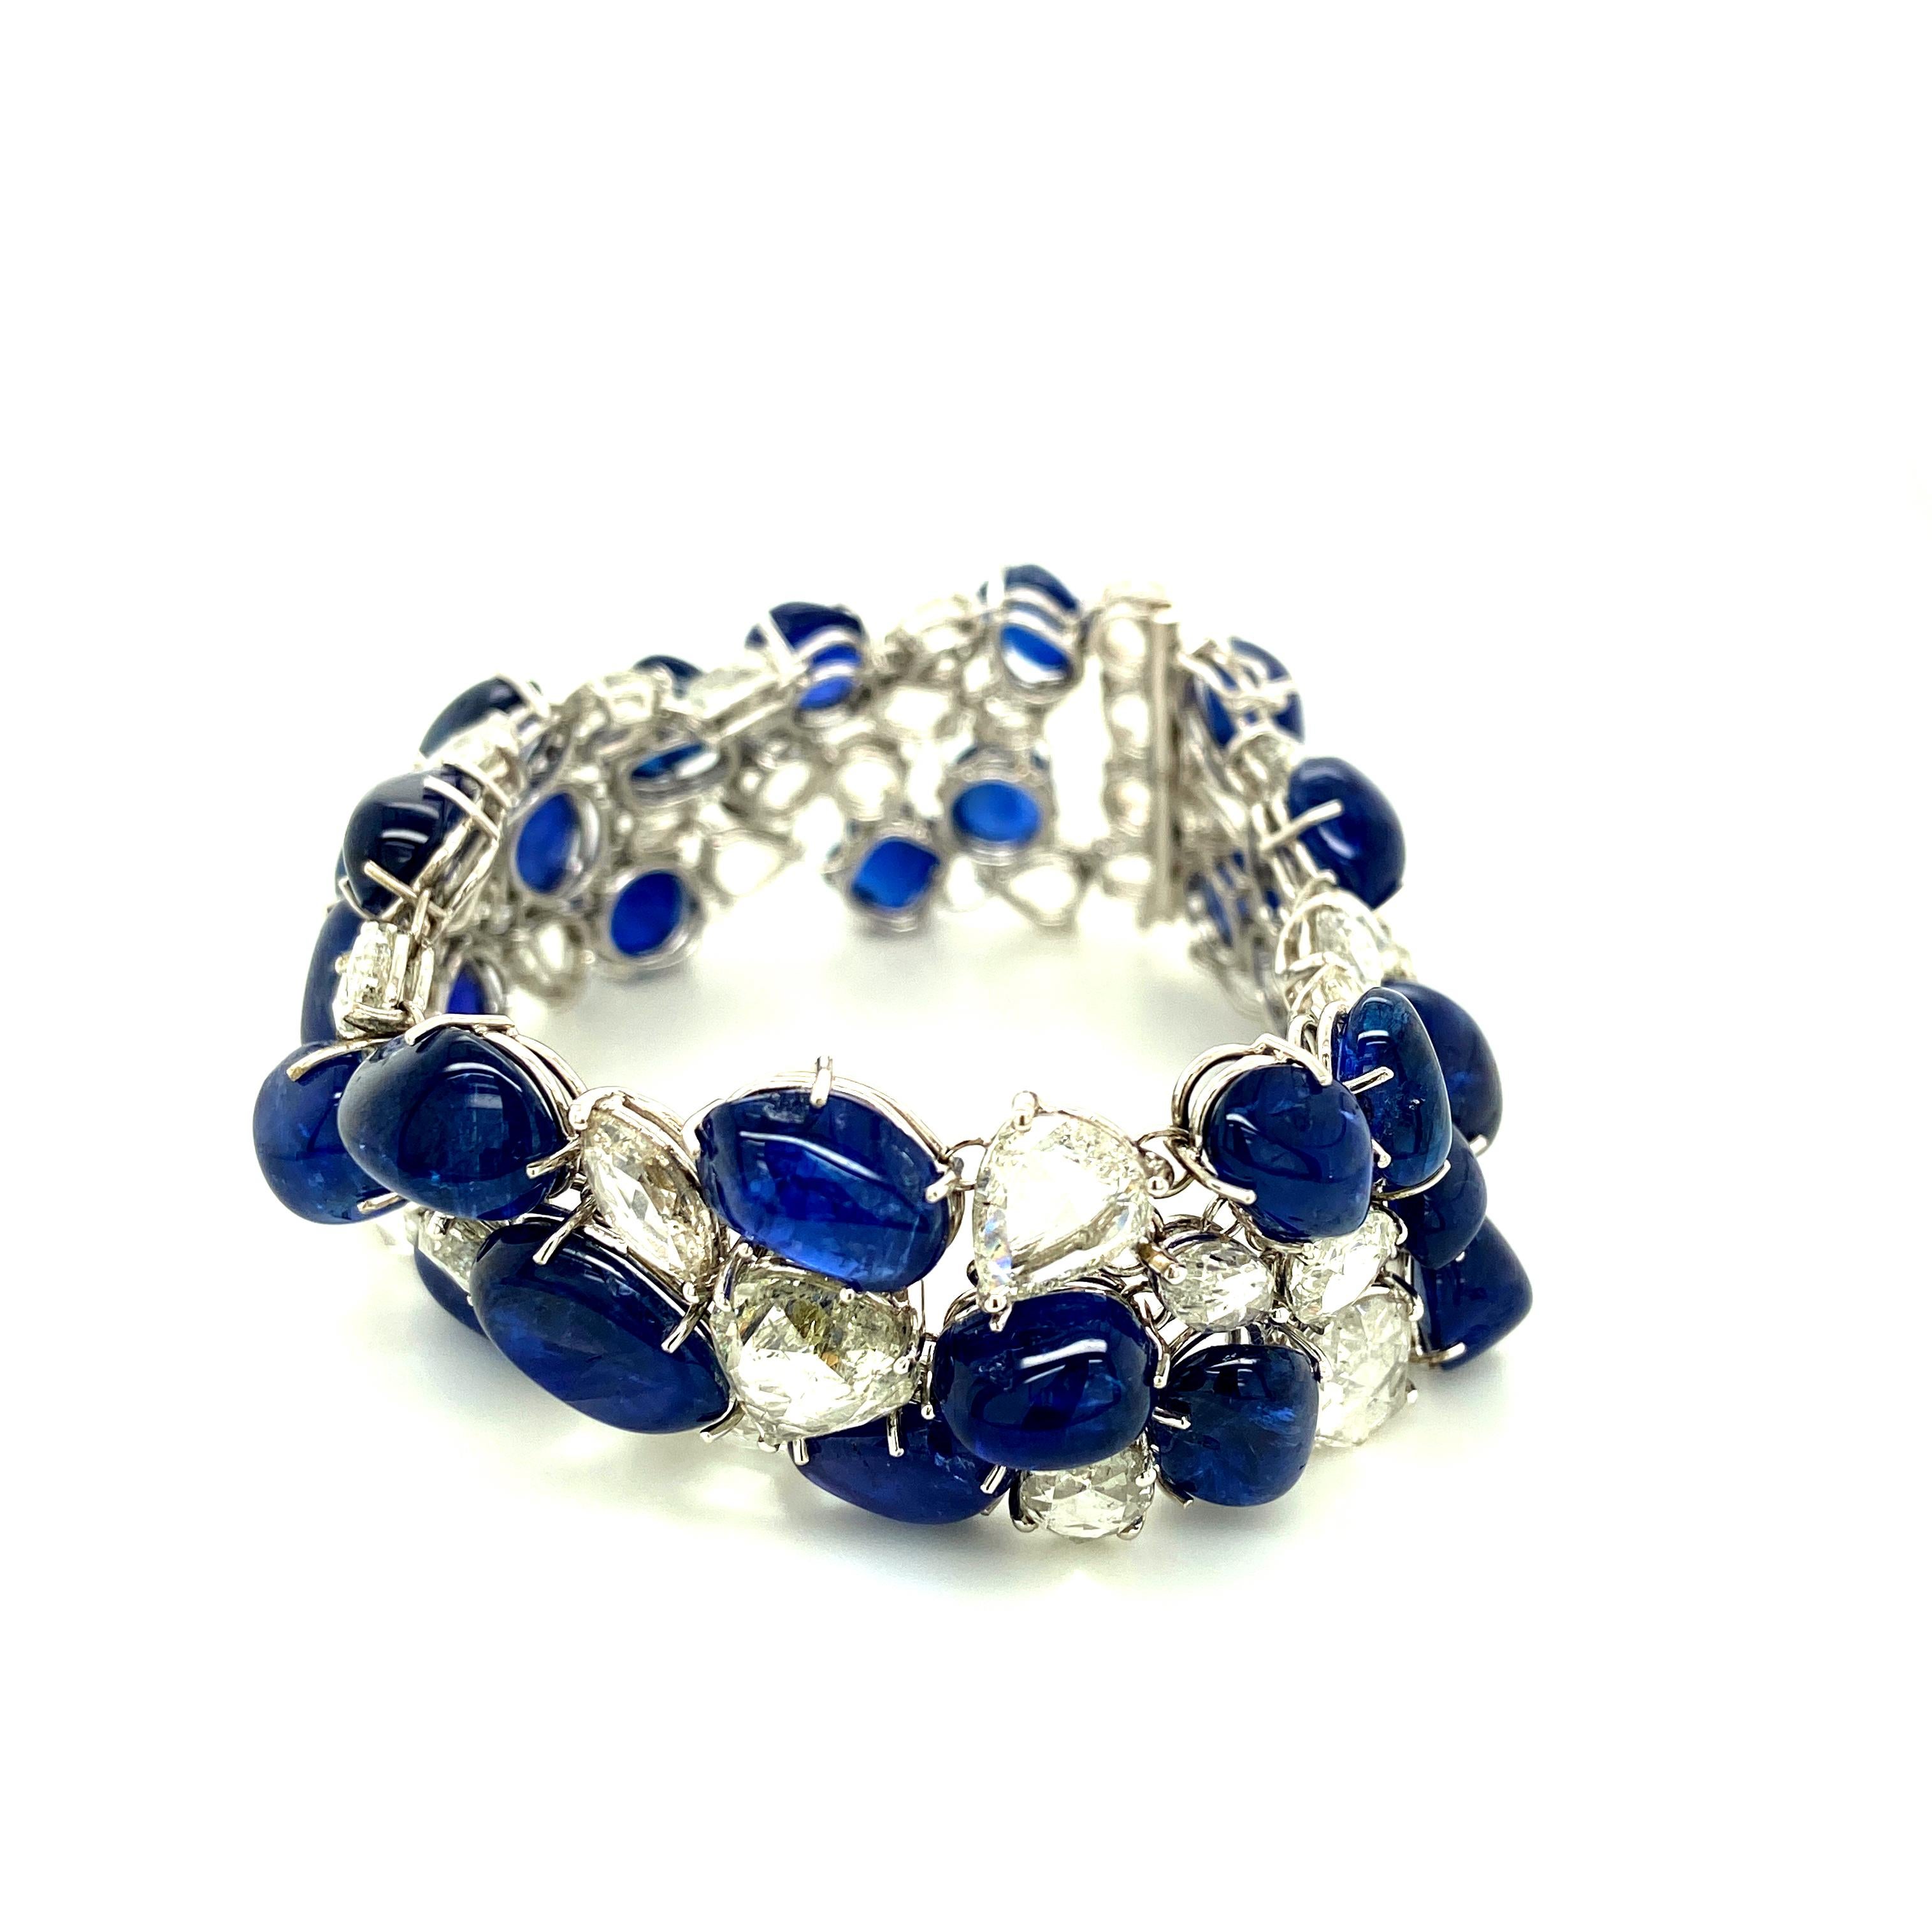 120 Carat No Heat Vivid Blue Sapphire Cabochons And Rose Cut Diamond Bracelet:

An extremely beautiful and rare jewel, it features a staggering 120.62 carat of unheated sapphire cabochons along with 35.16 carat of white rose cut diamonds. The